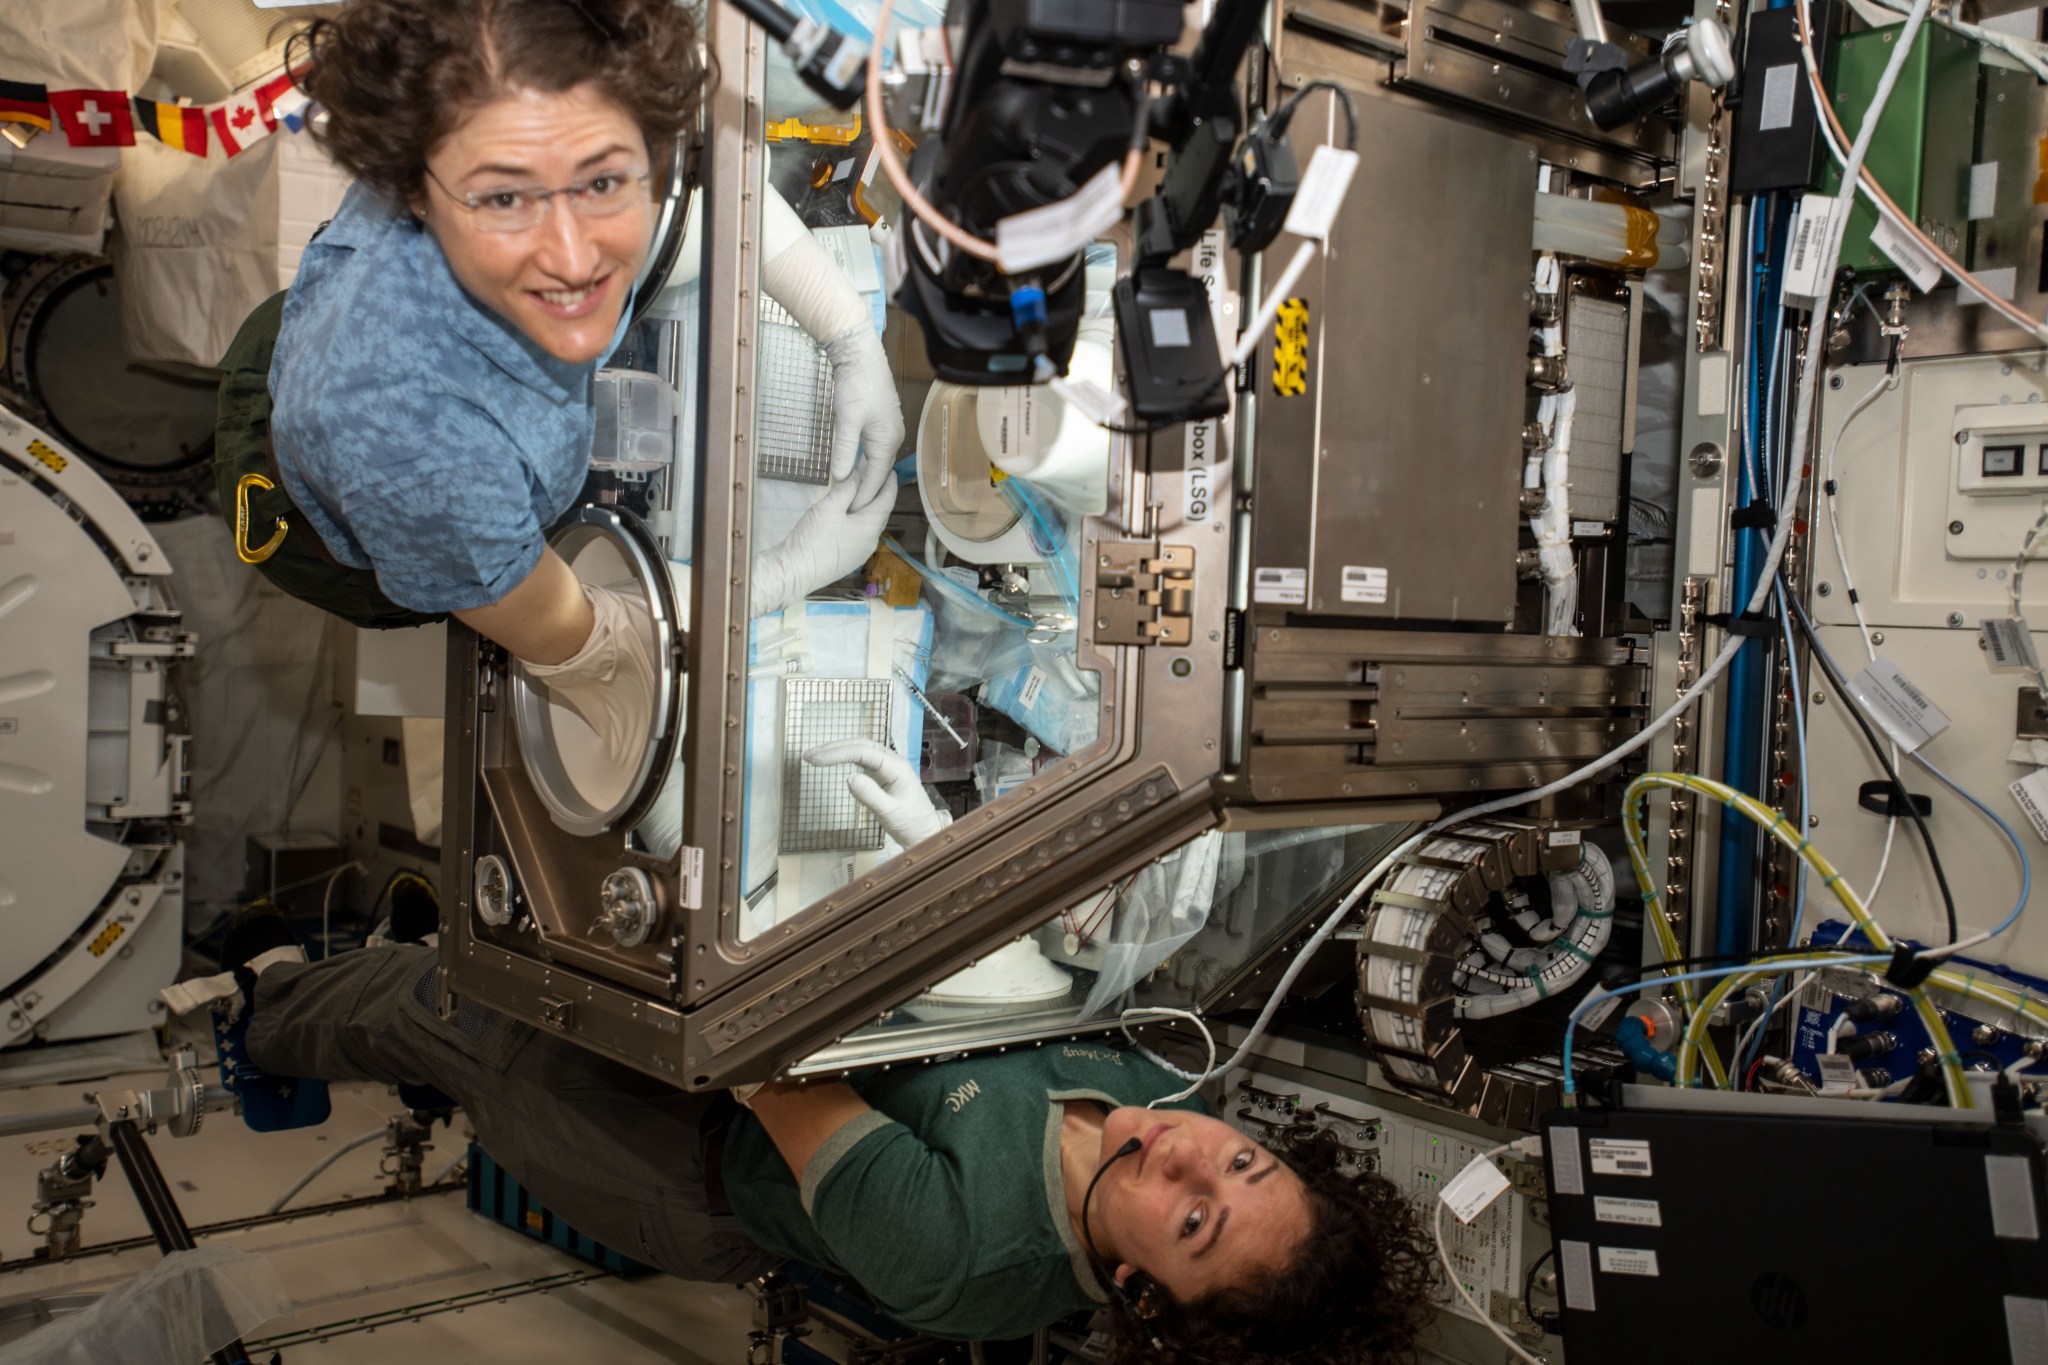 NASA astronauts (from top) Christina Koch and Jessica Meir conduct research operations inside the Japanese Kibo lab module's Life Sciences Glovebox. The Expedition 61 flight engineers were studying mice for the Rodent Research-14 investigation, which observes how microgravity affects the body on a cellular and organ level.